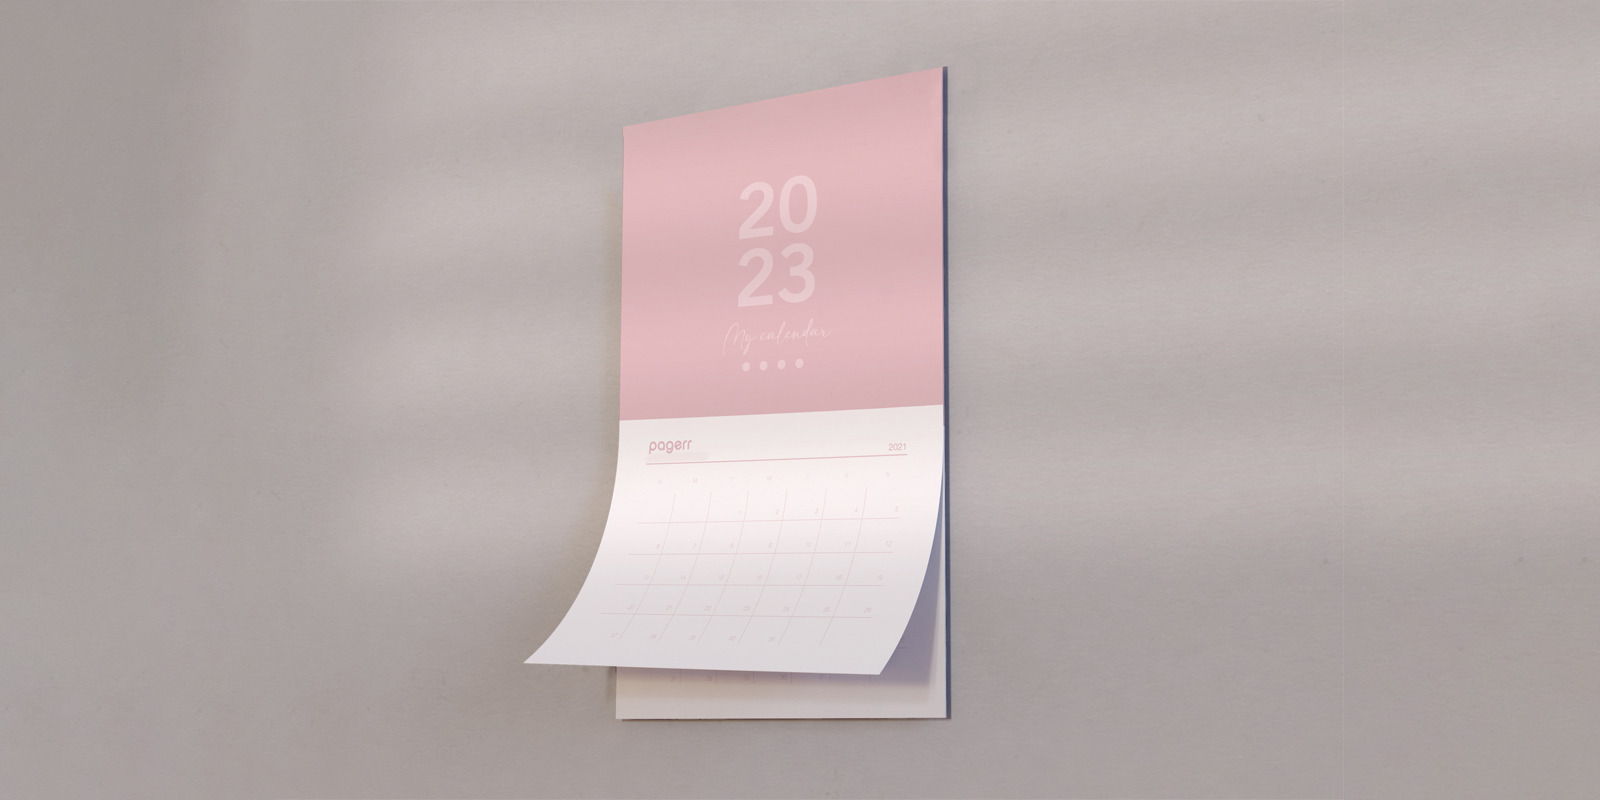 Magnetic calendars in Valencia - Print with Pagerr